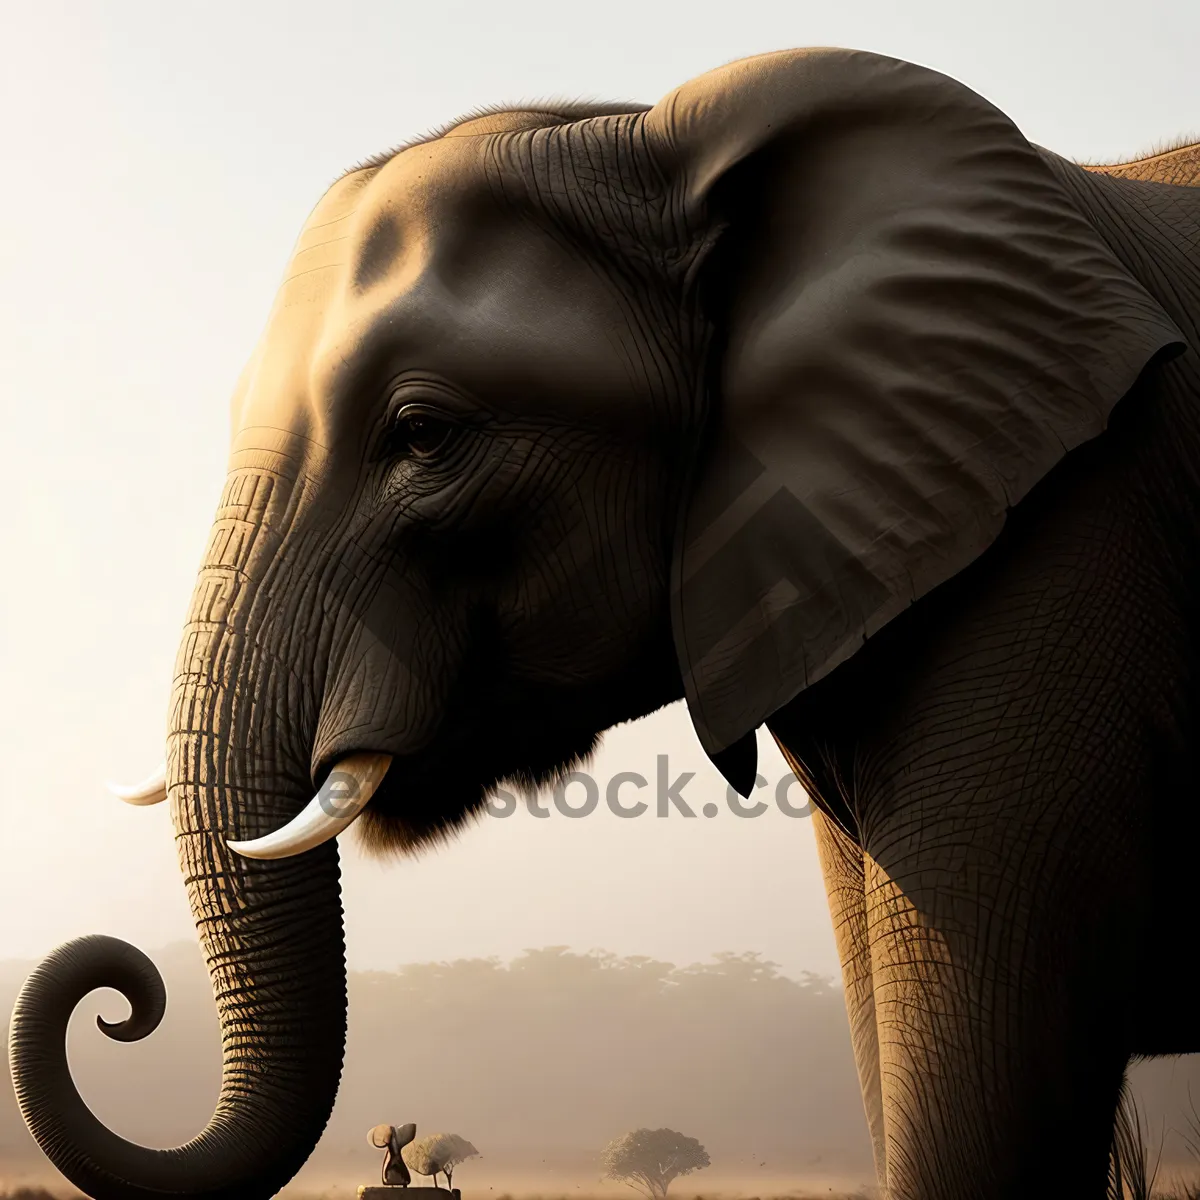 Picture of Wild Elephant with Majestic Tusks in Safari Park